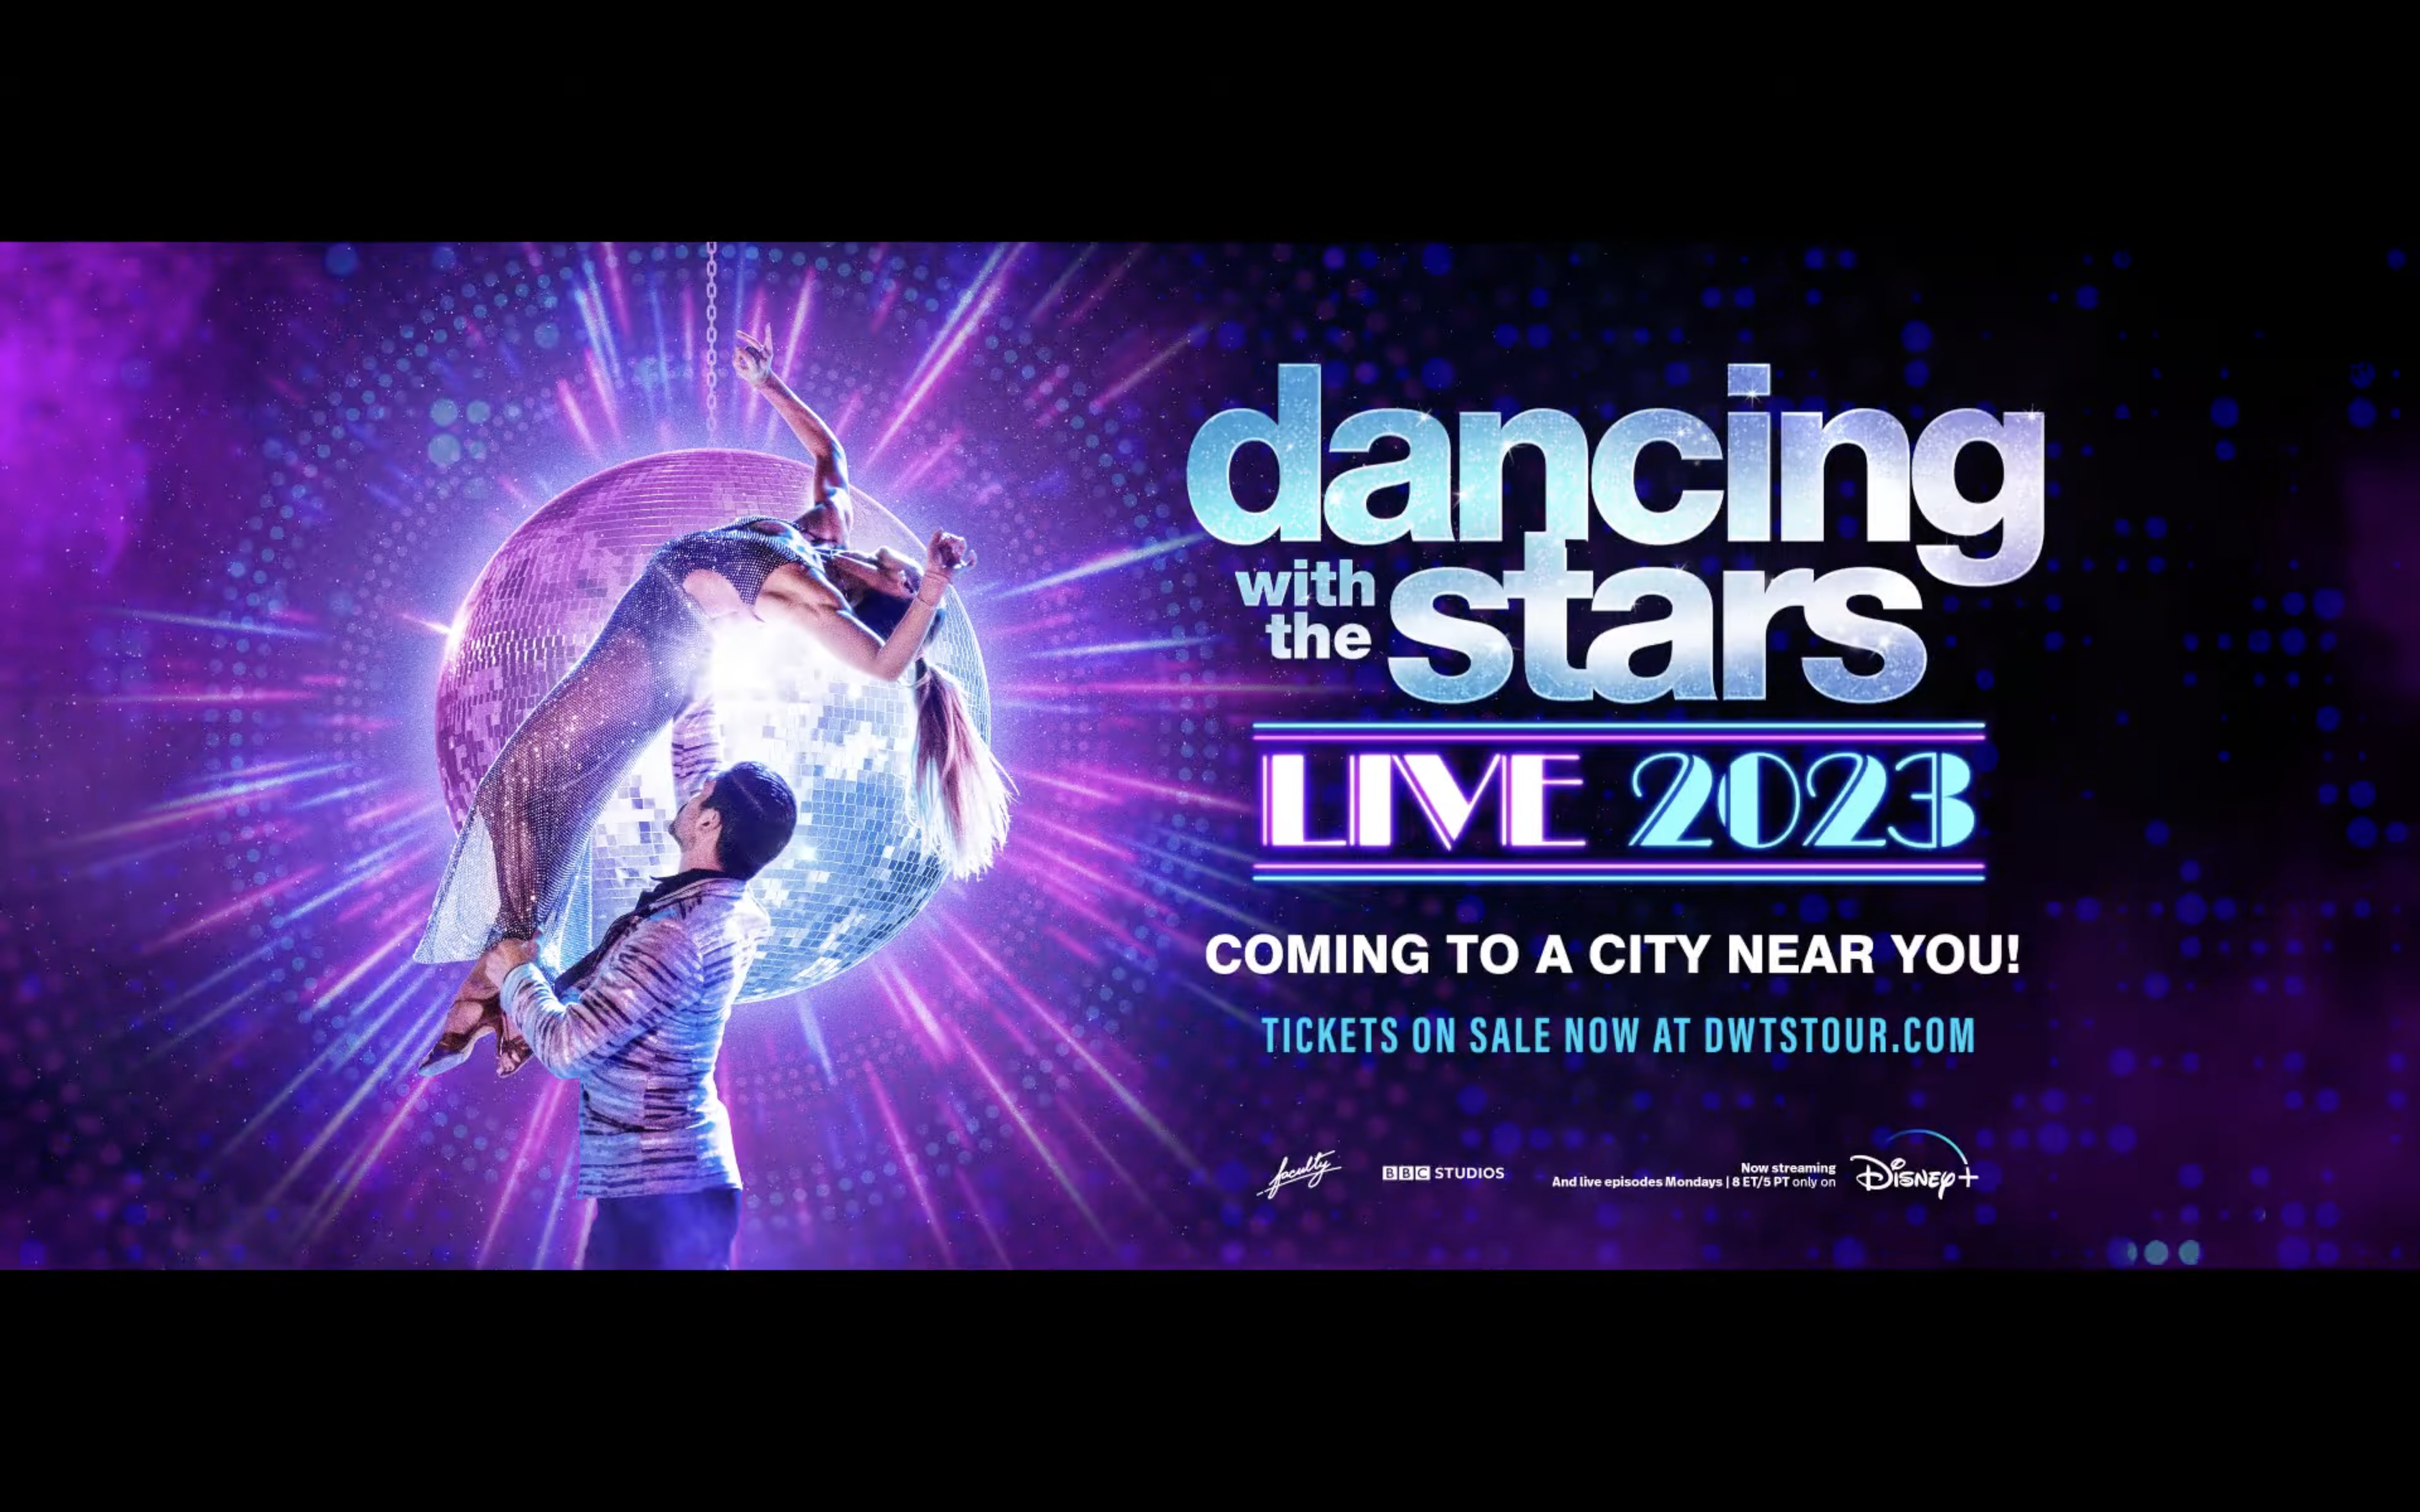 Dancing With The Stars live Where to buy tickets to see the dance show live